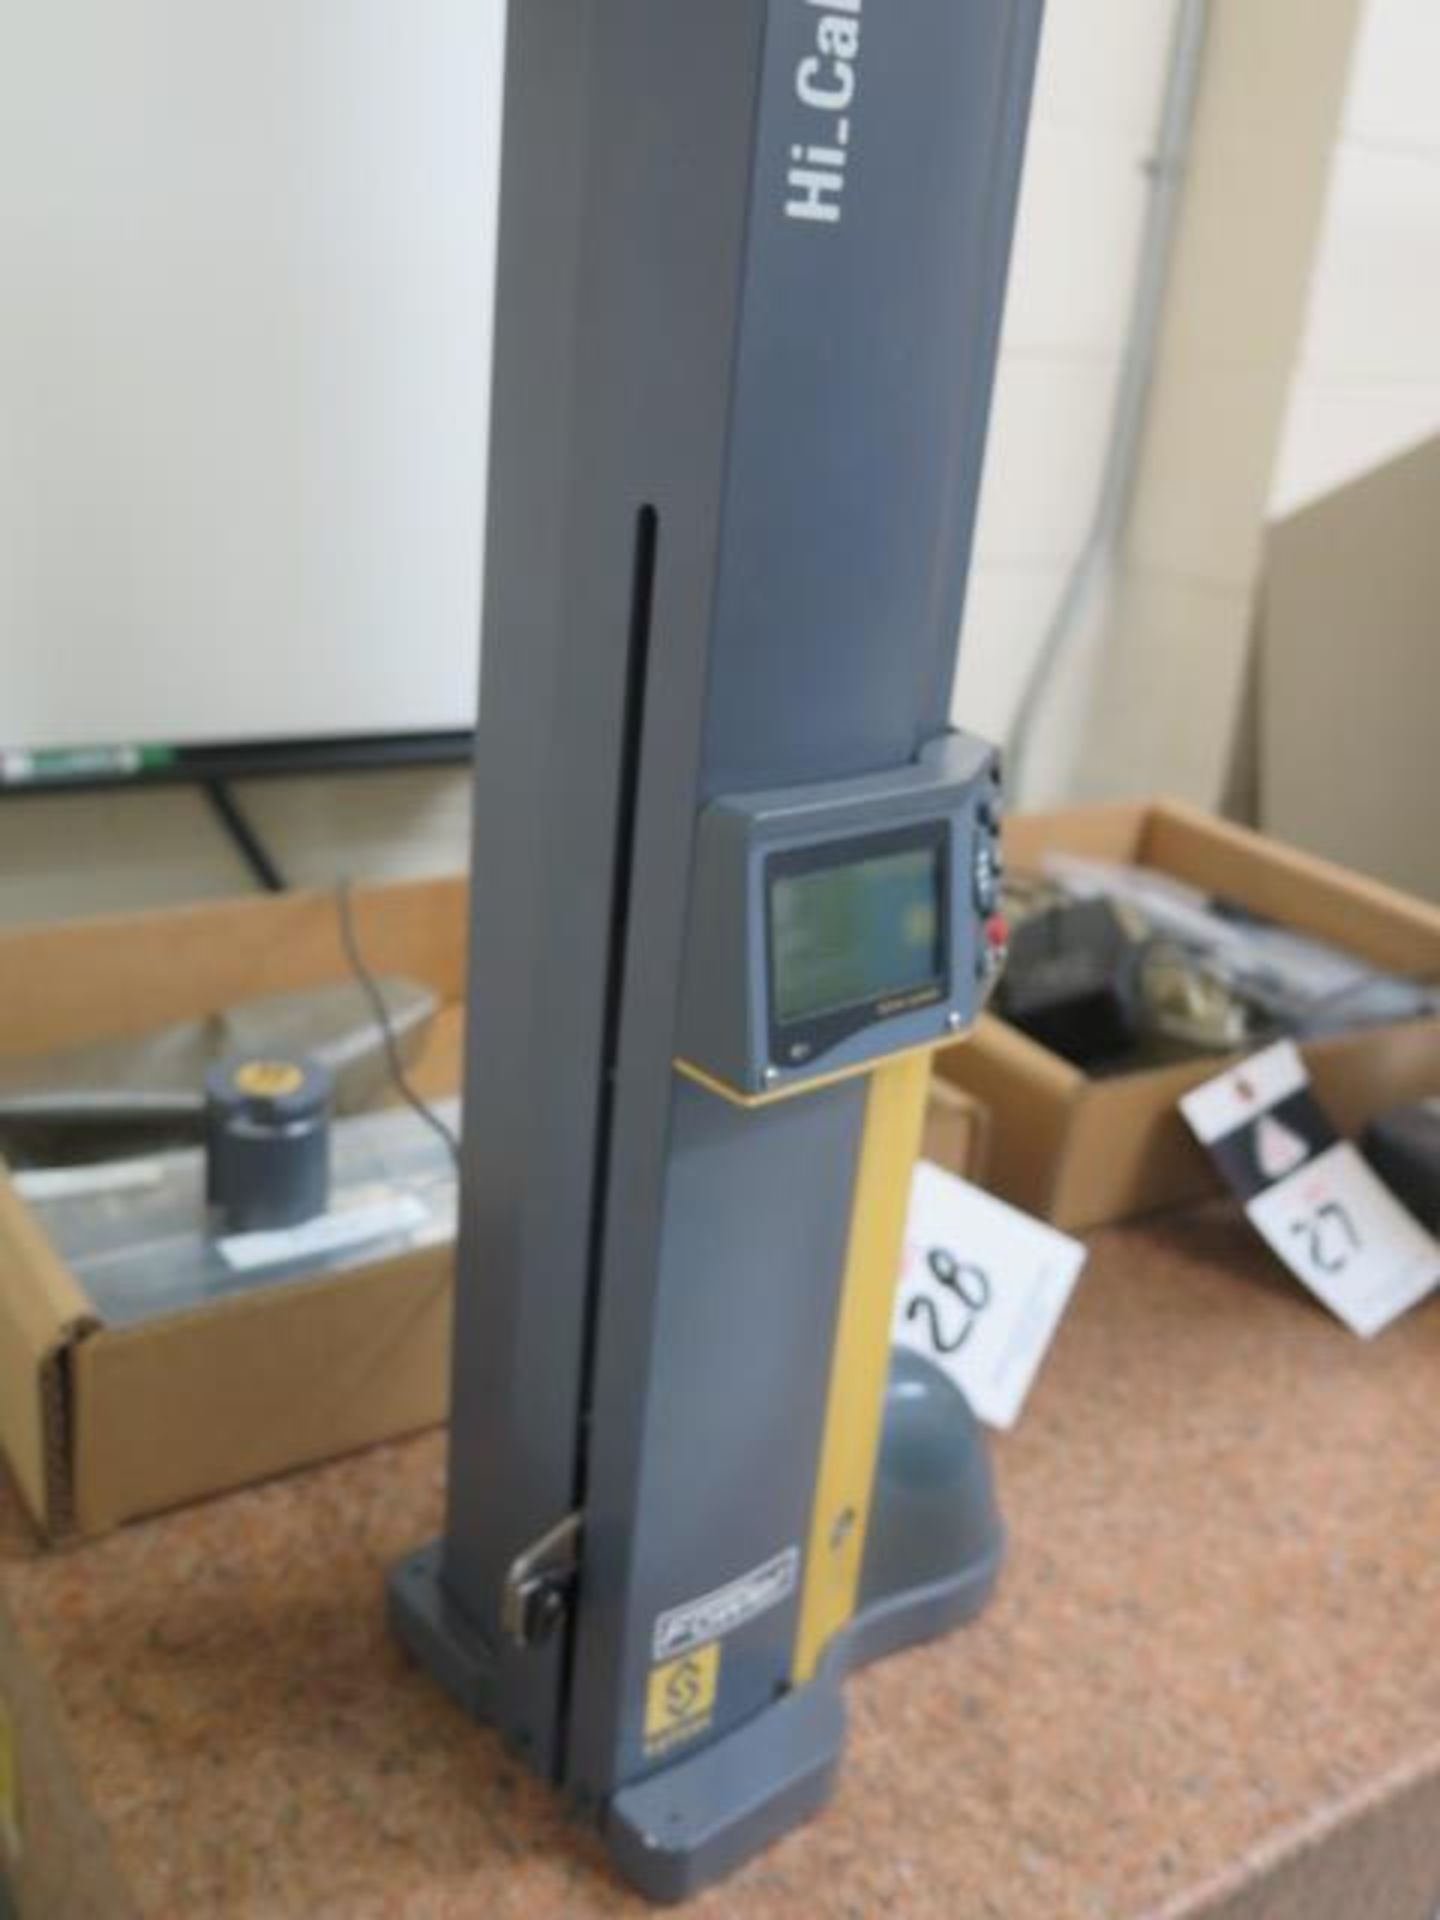 Fowler Sylvac Hi_CAL 300 12” Digital Height Gage w/ Access (SOLD AS-IS - NO WARRANTY) - Image 5 of 8